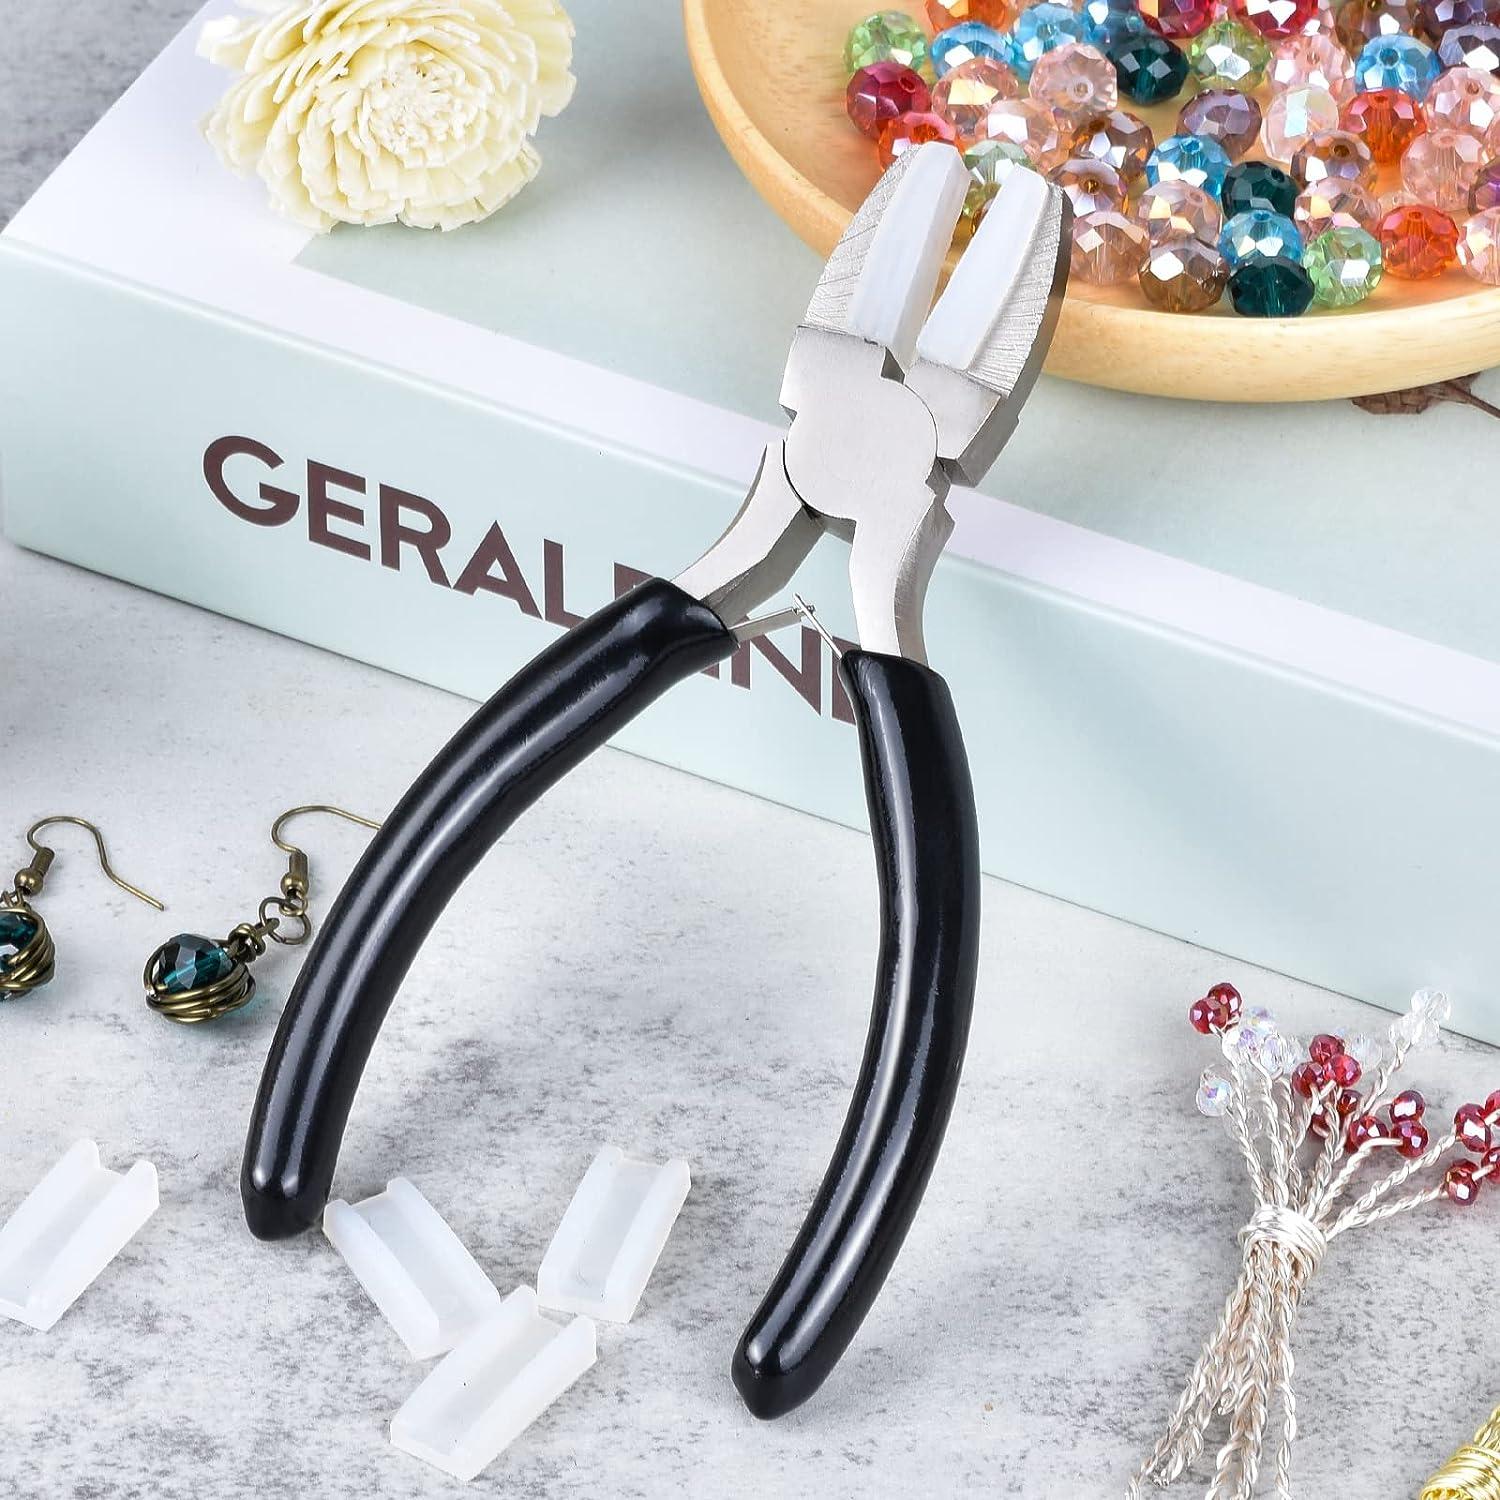  Nylon Pliers Jewelry Making Tools Carbon Steel Tools for  Beading, Looping, Shaping Wire, Jewelry Making and Other Crafts : Arts,  Crafts & Sewing